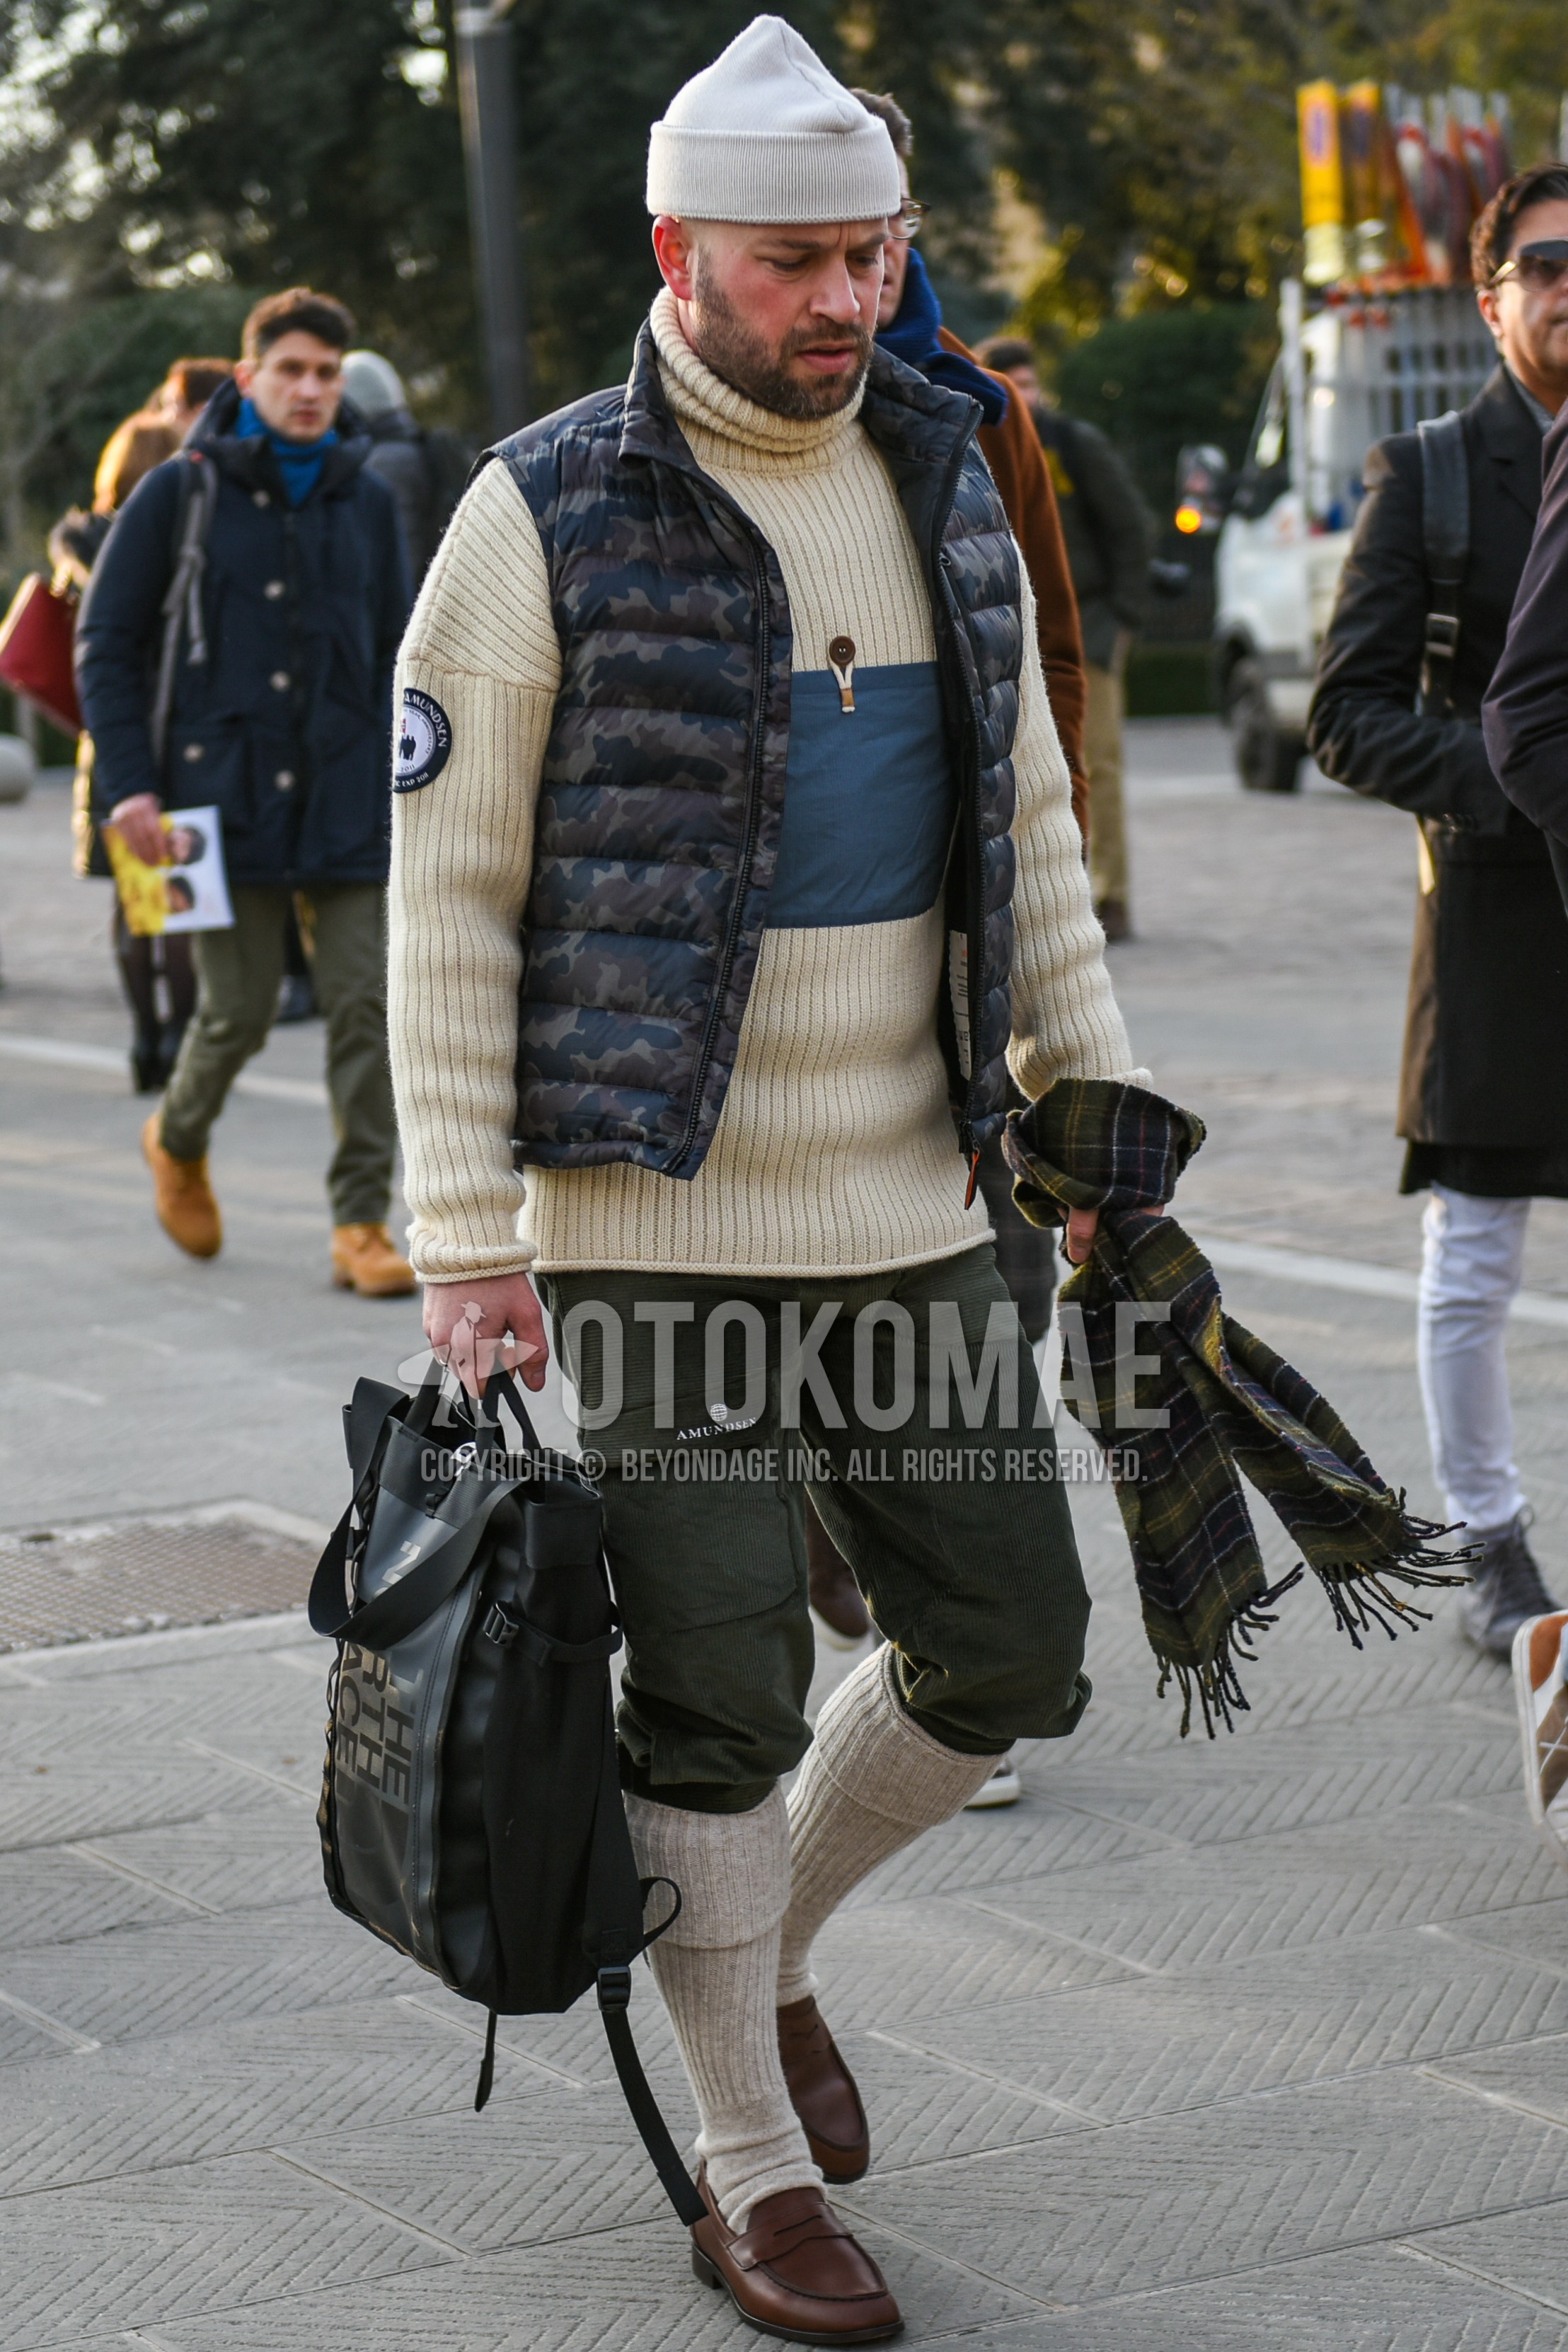 Men's autumn winter outfit with white plain knit cap, green camouflage down jacket, olive green plain cargo pants, beige plain socks, brown coin loafers leather shoes, green camouflage briefcase/handbag.